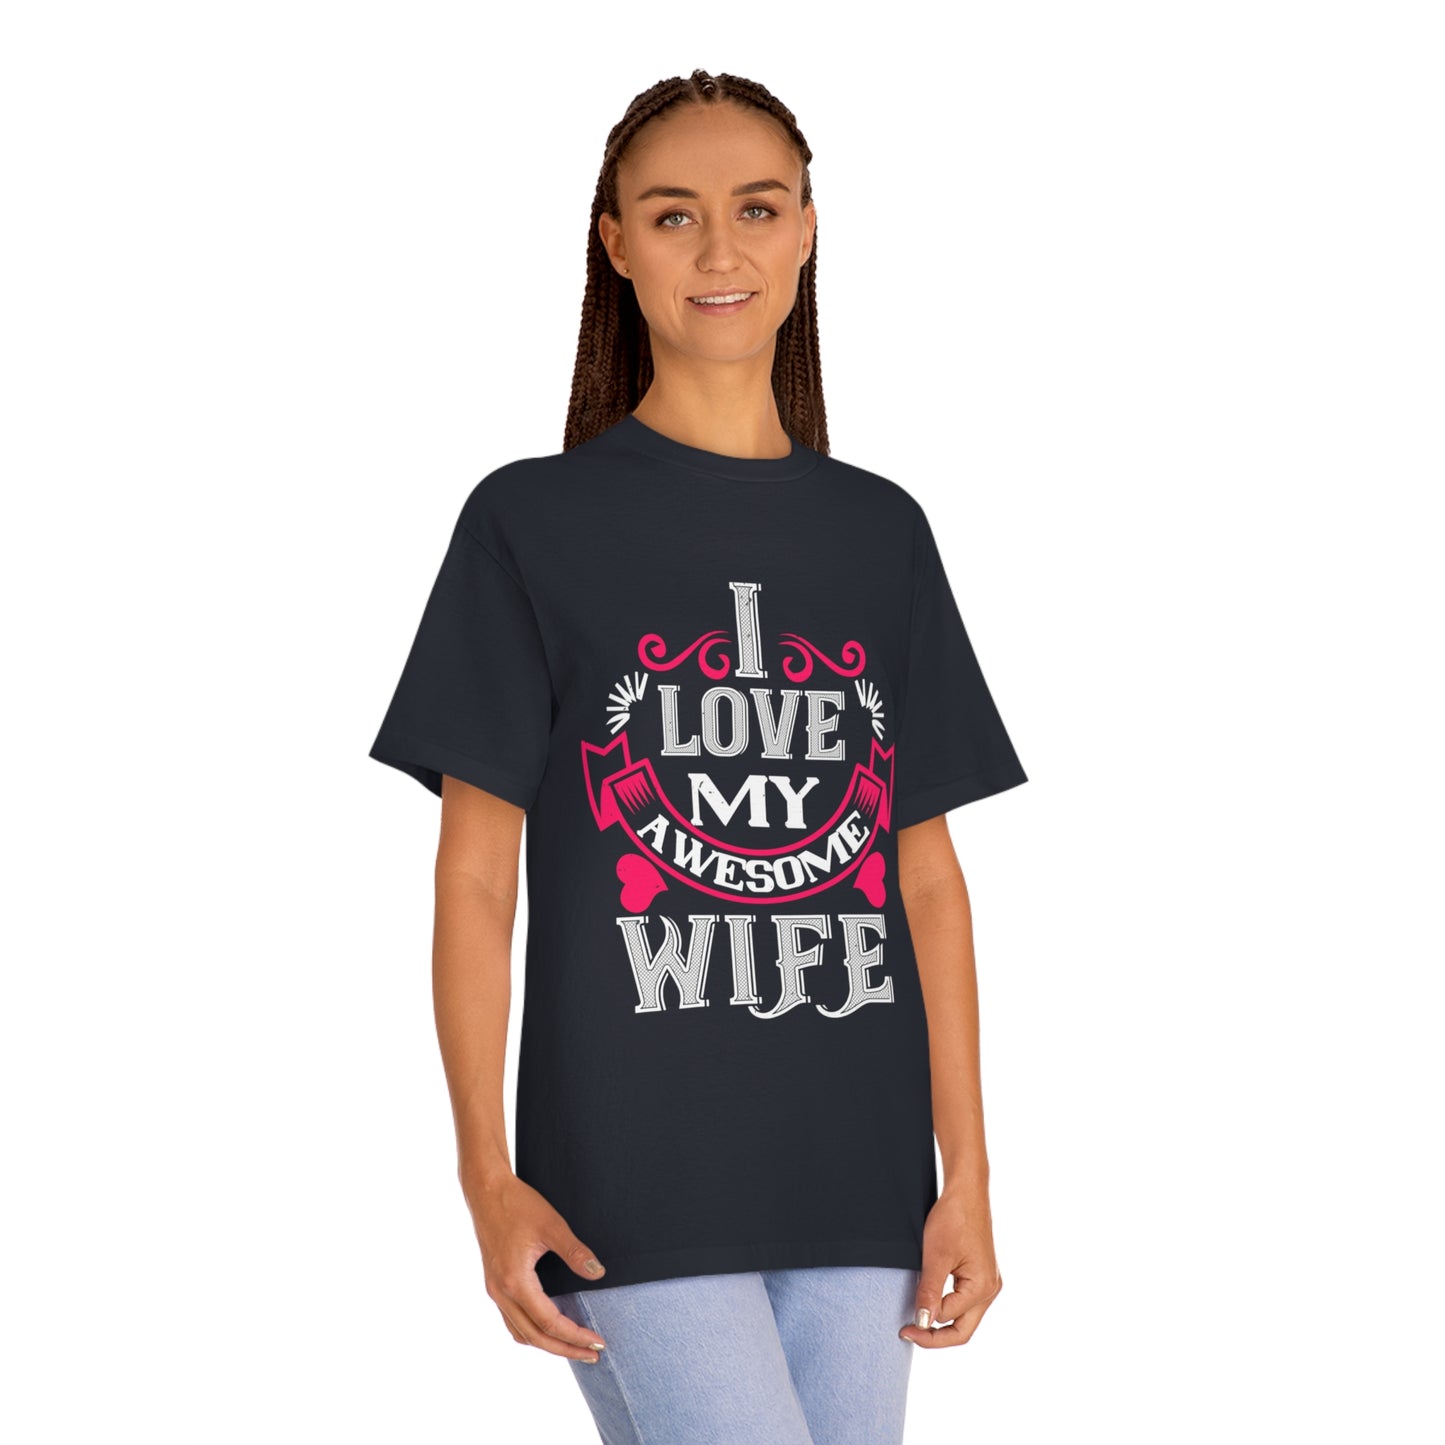 I love my awesome wife Unisex Classic Tee